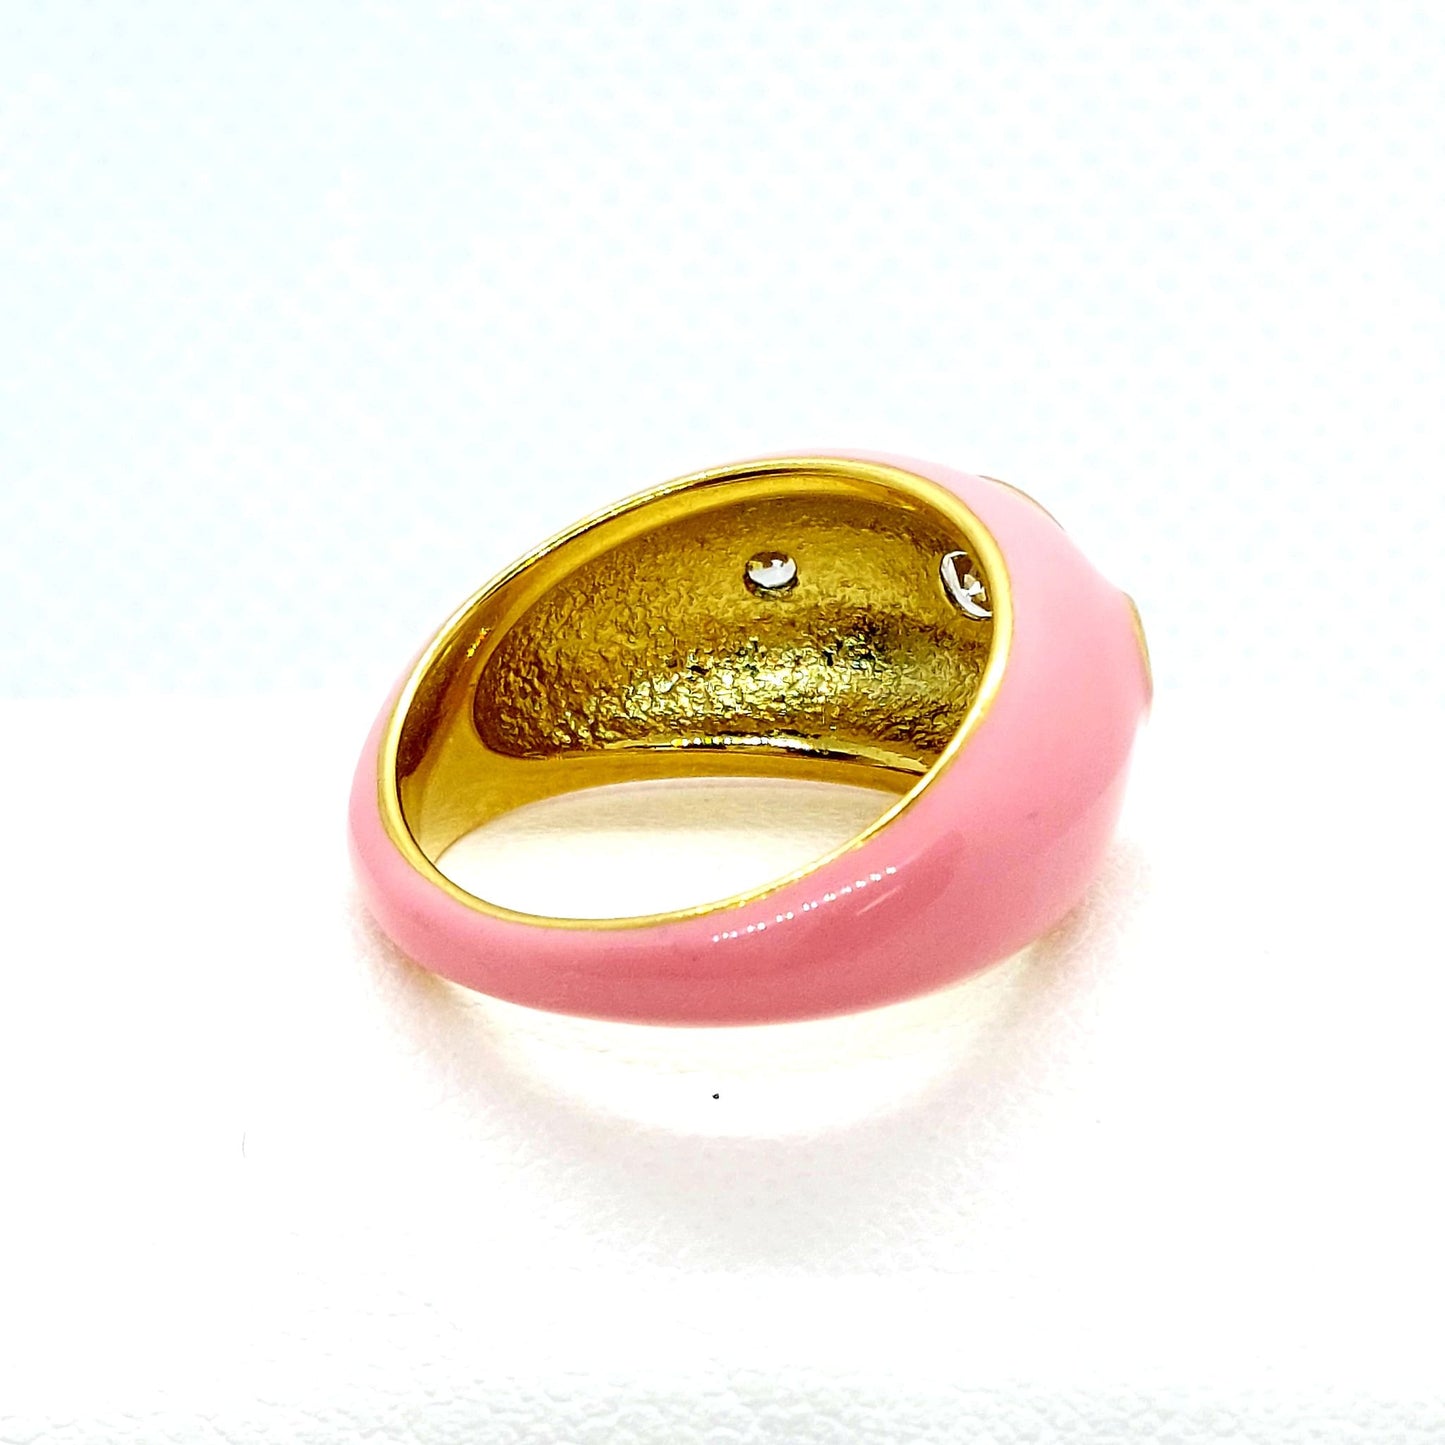 Zircon in Pink Enamel Ring - Stainless Steel Gold Plated